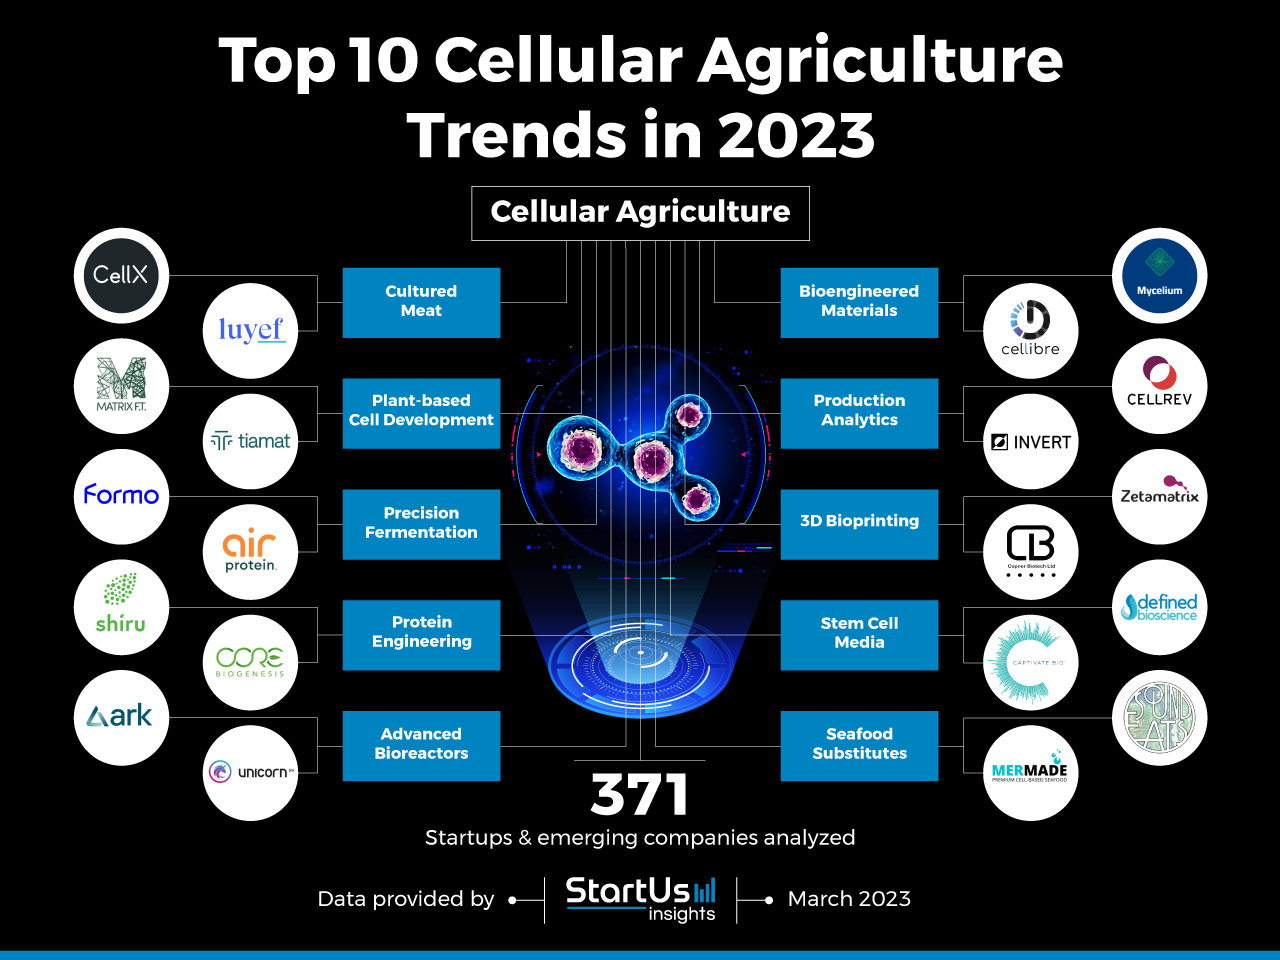 Top 10 Cellular Agriculture Trends in 2023